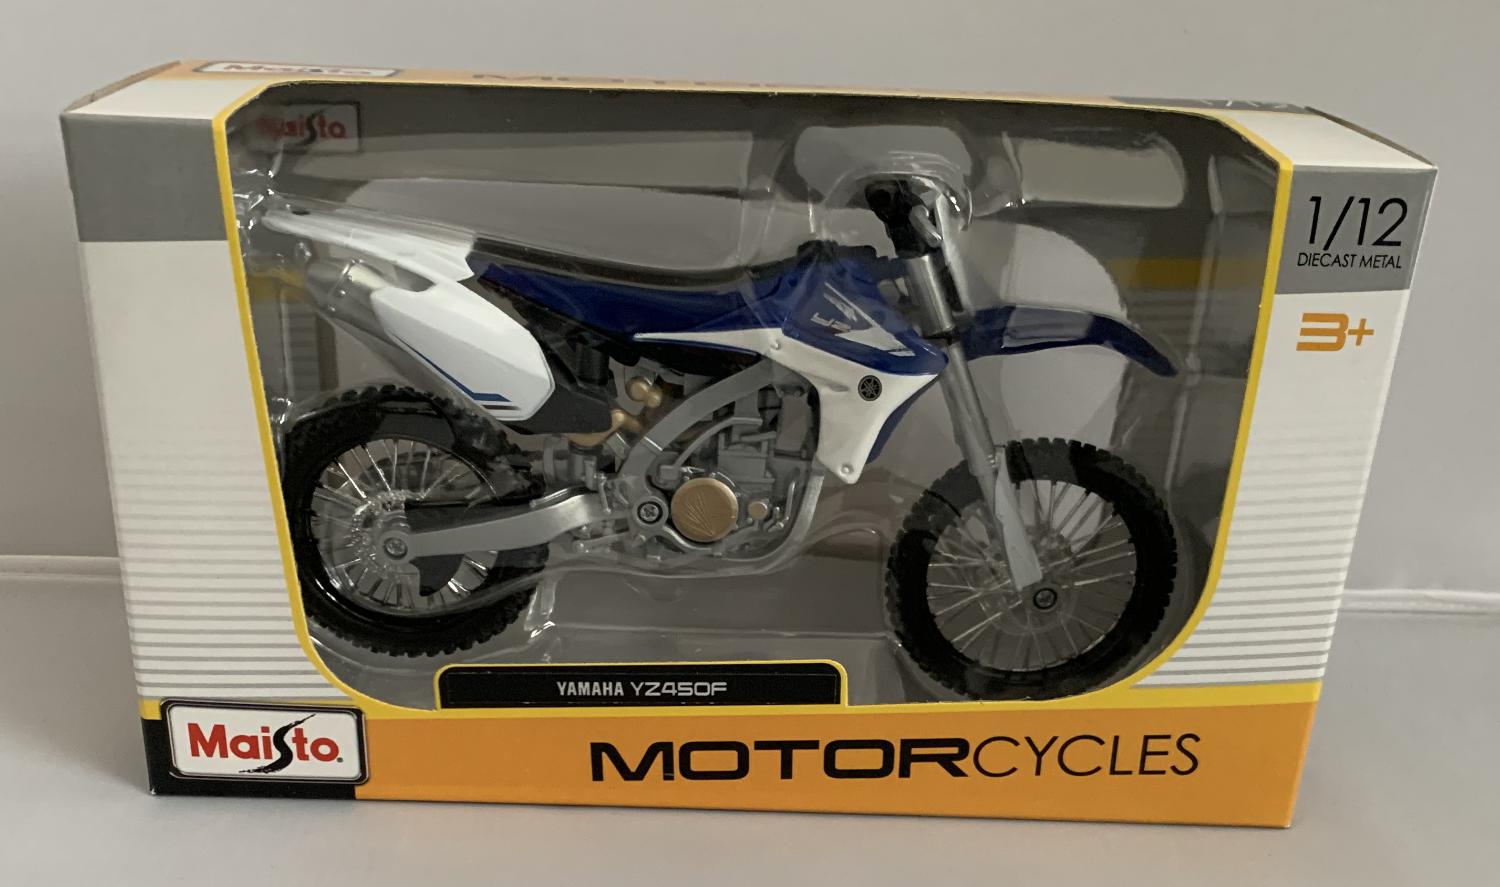 Yamaha YZ450F in blue and white 1:12 scale model from Maisto